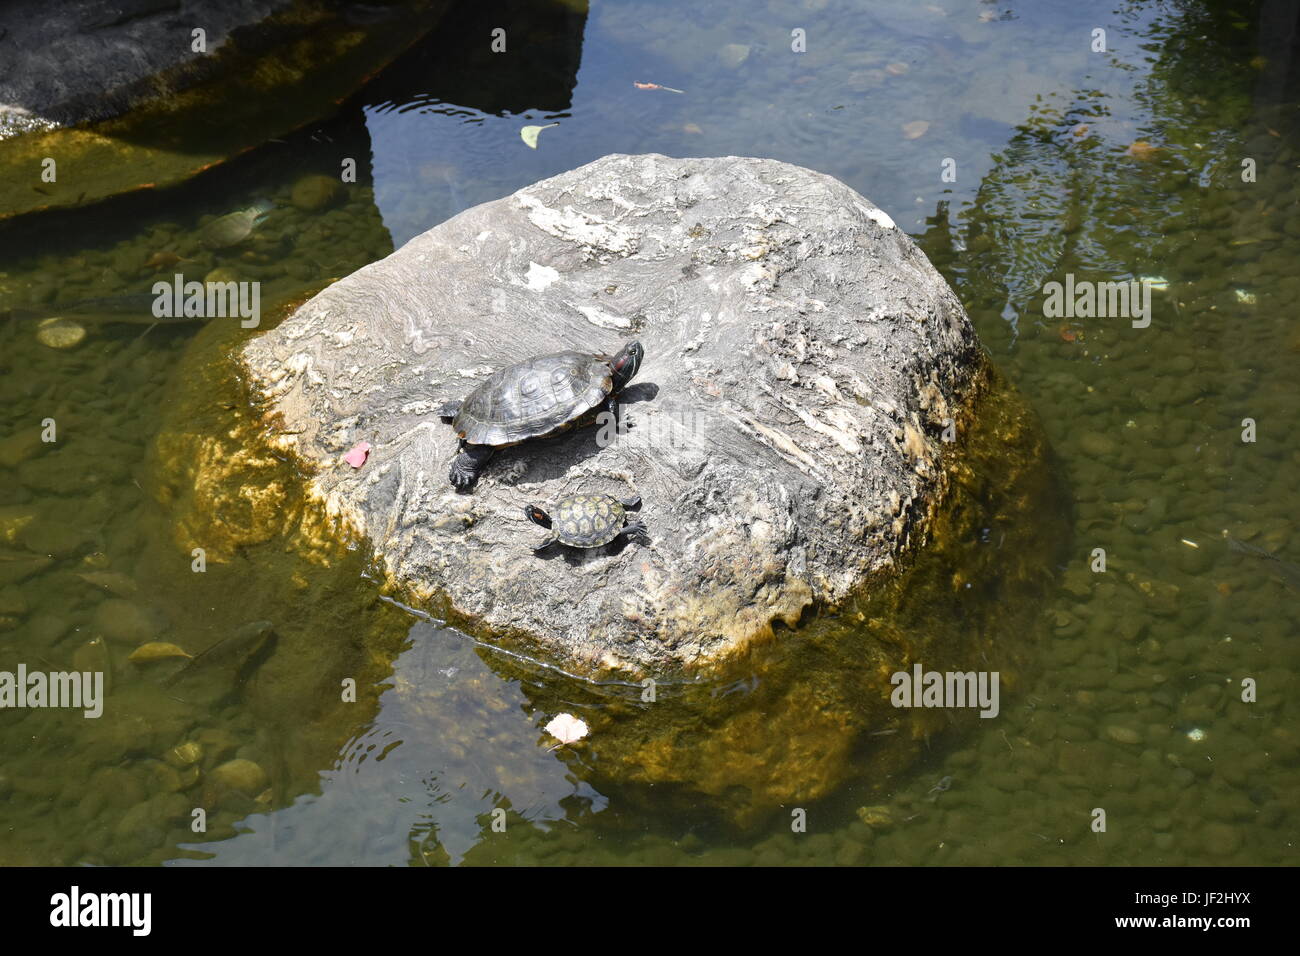 Big and small turtles sun bathing on large rock in pond at park, and were once pets that were released to get freedom. Stock Photo